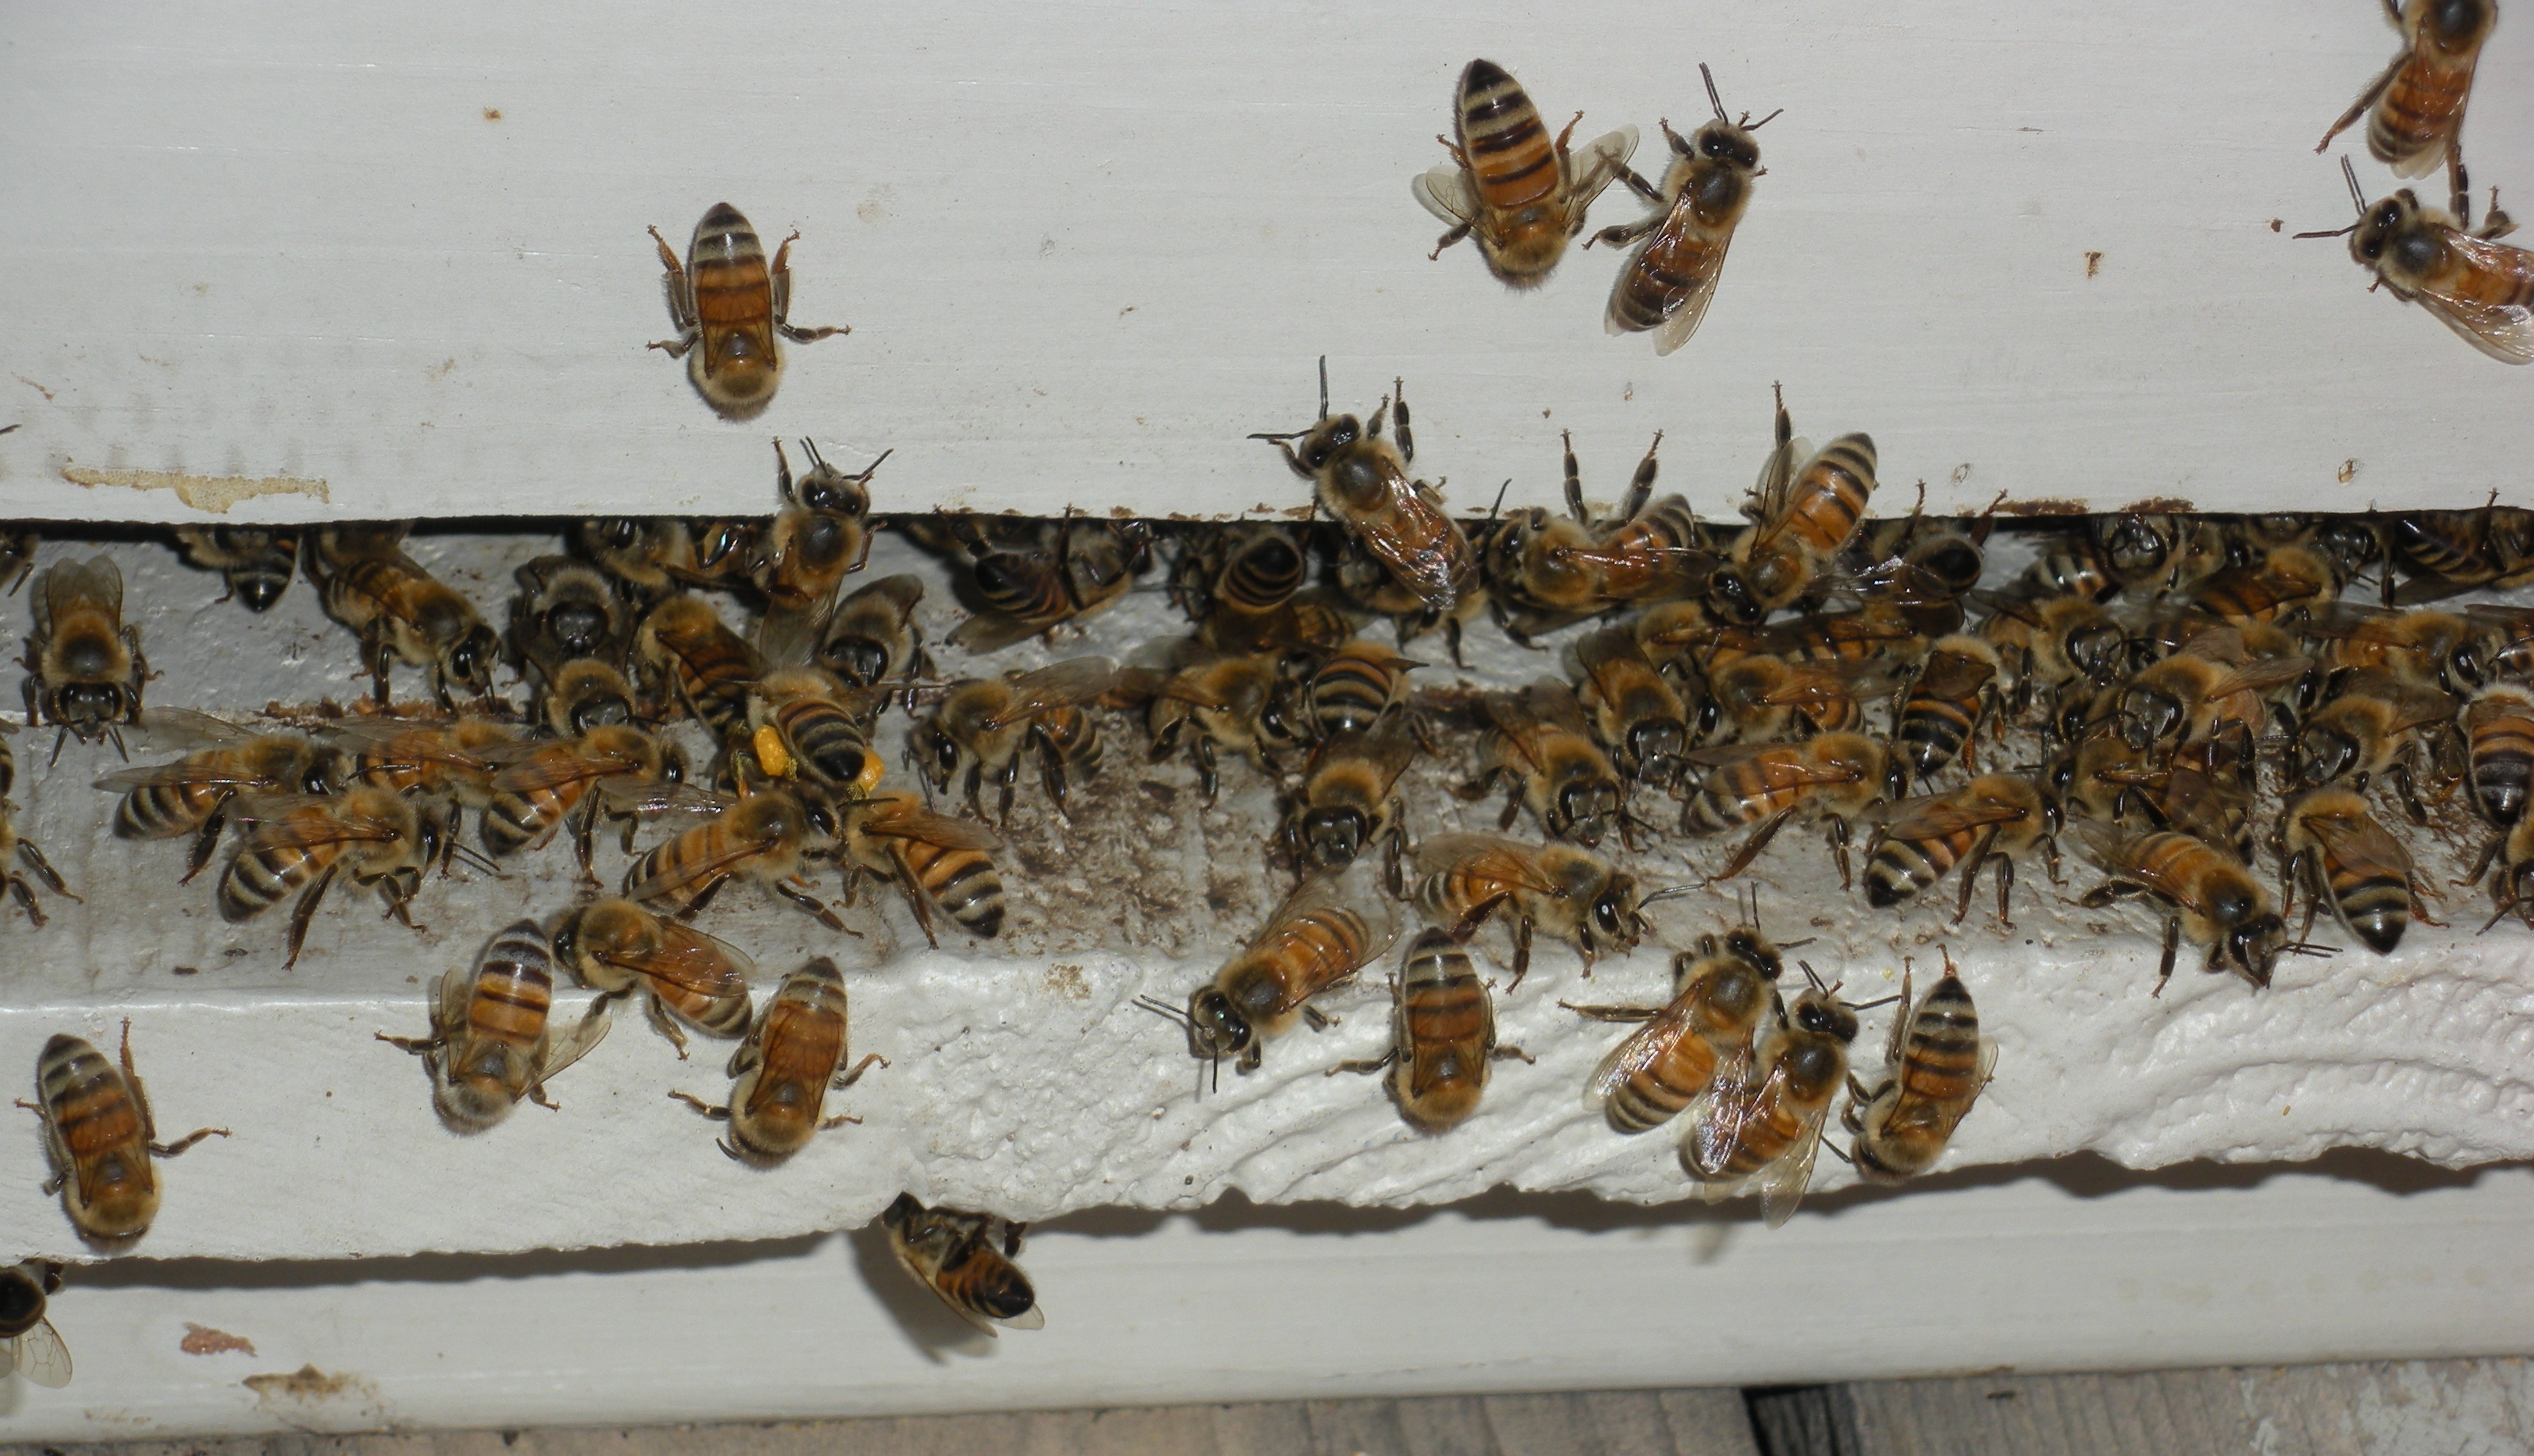 My Honeybees going into there bee hive